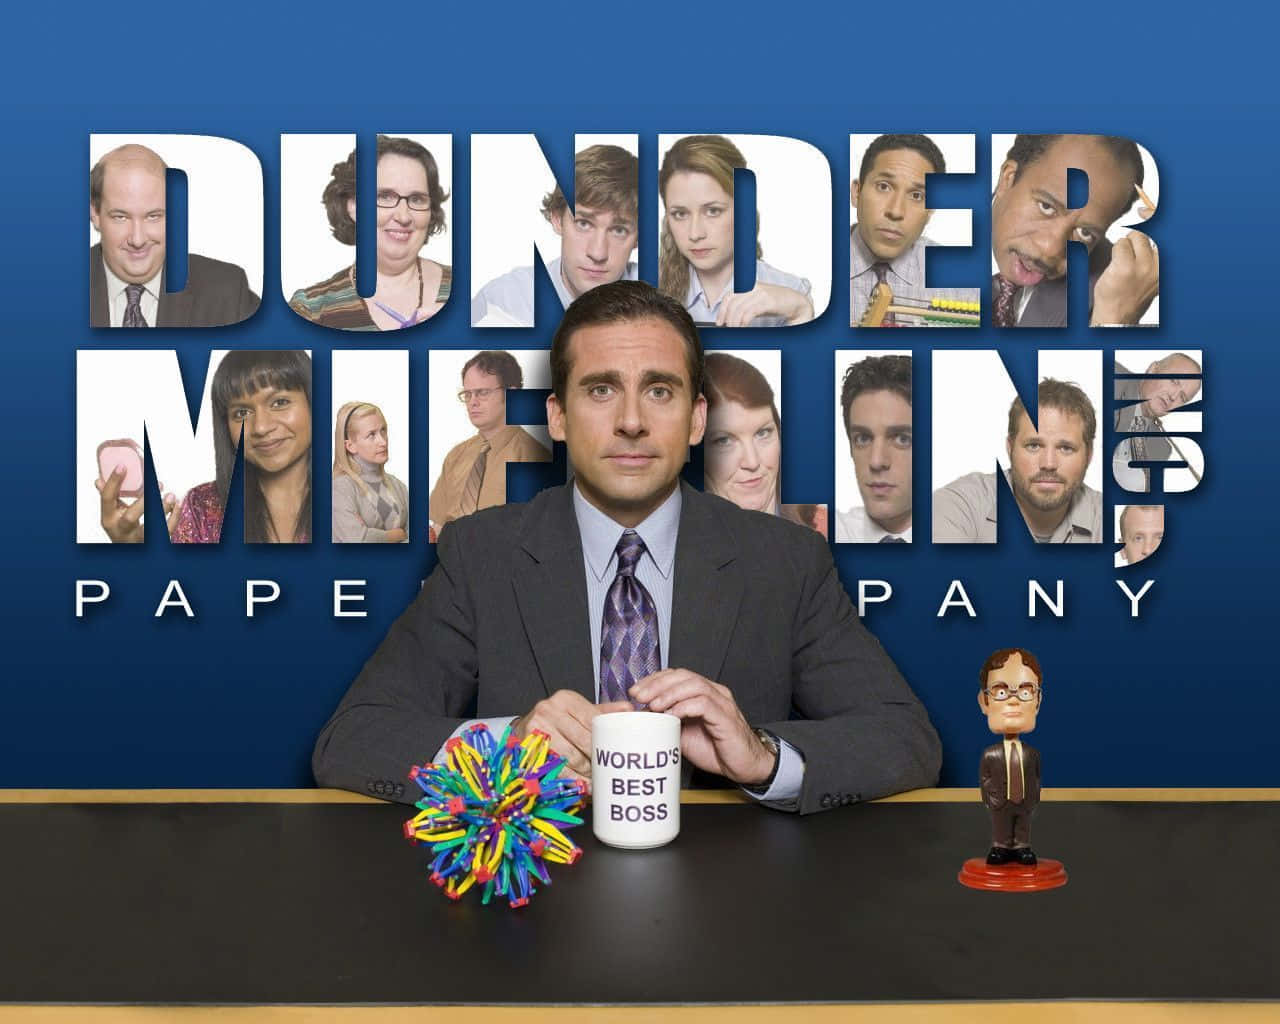 The Office Wallpaper  Office wallpaper, The office show, The office